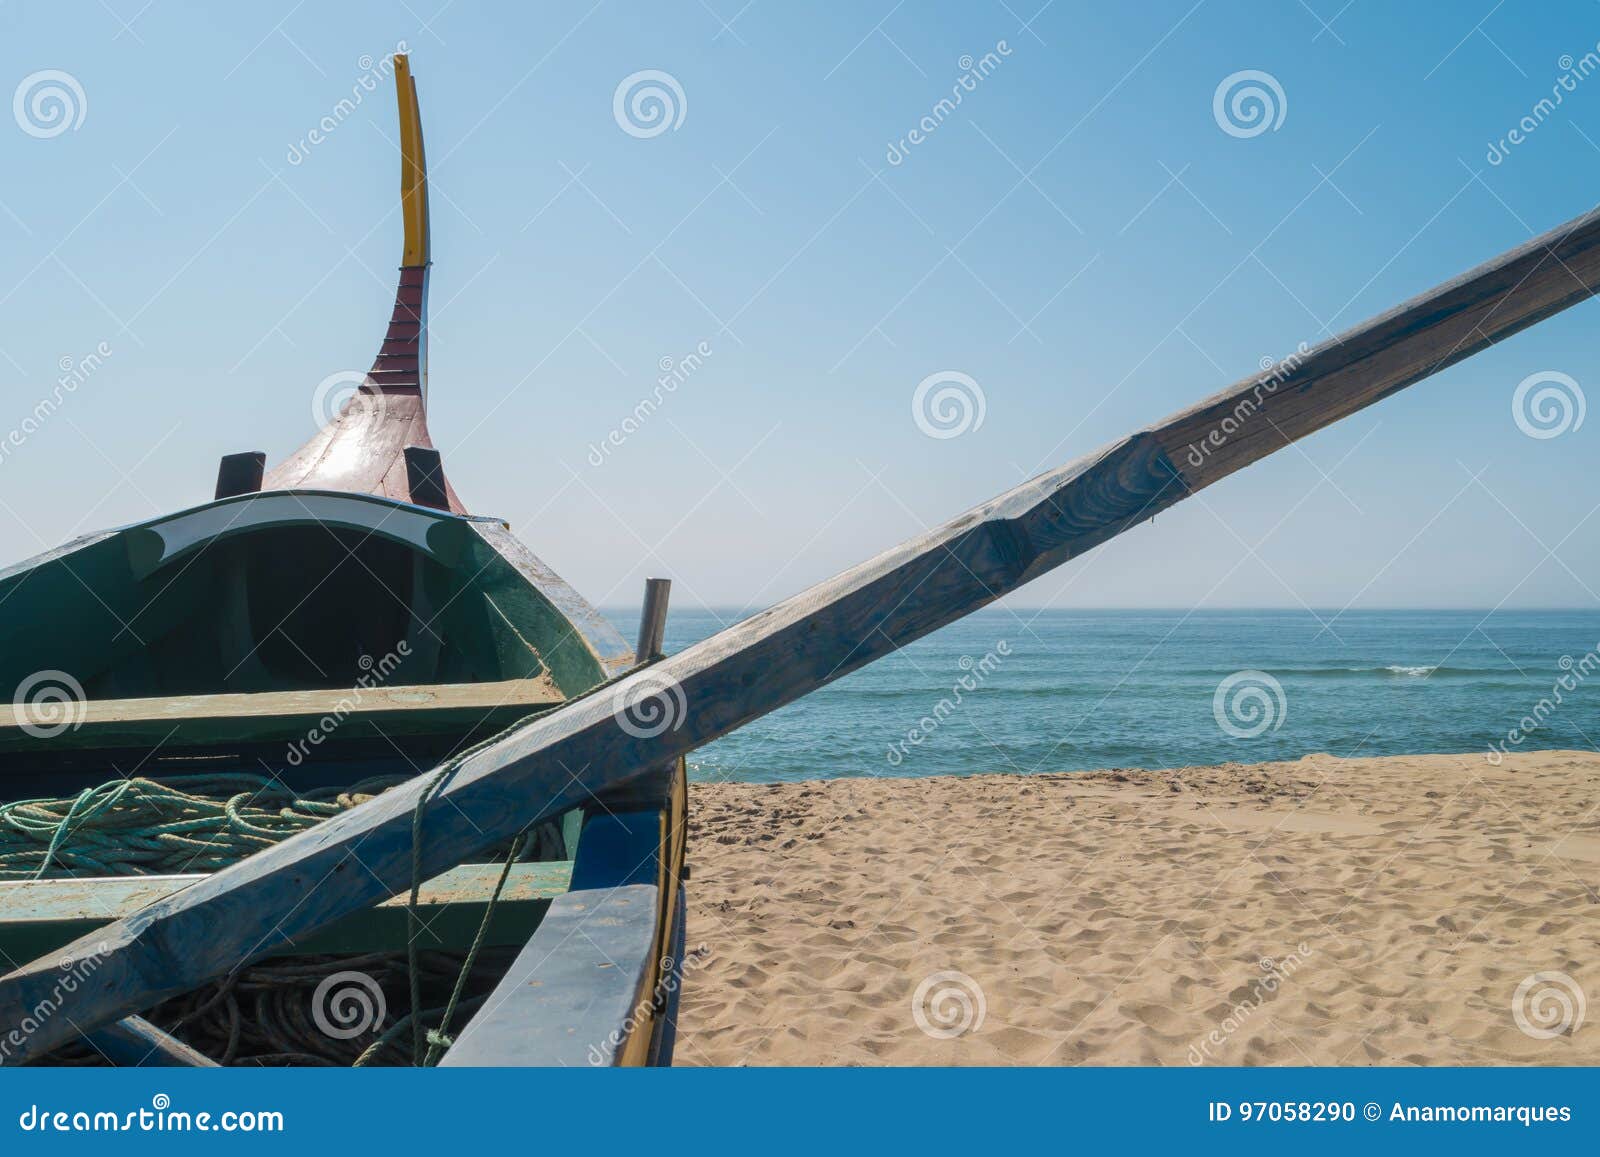 arte xavega typical portuguese old fishing boat on the beach in